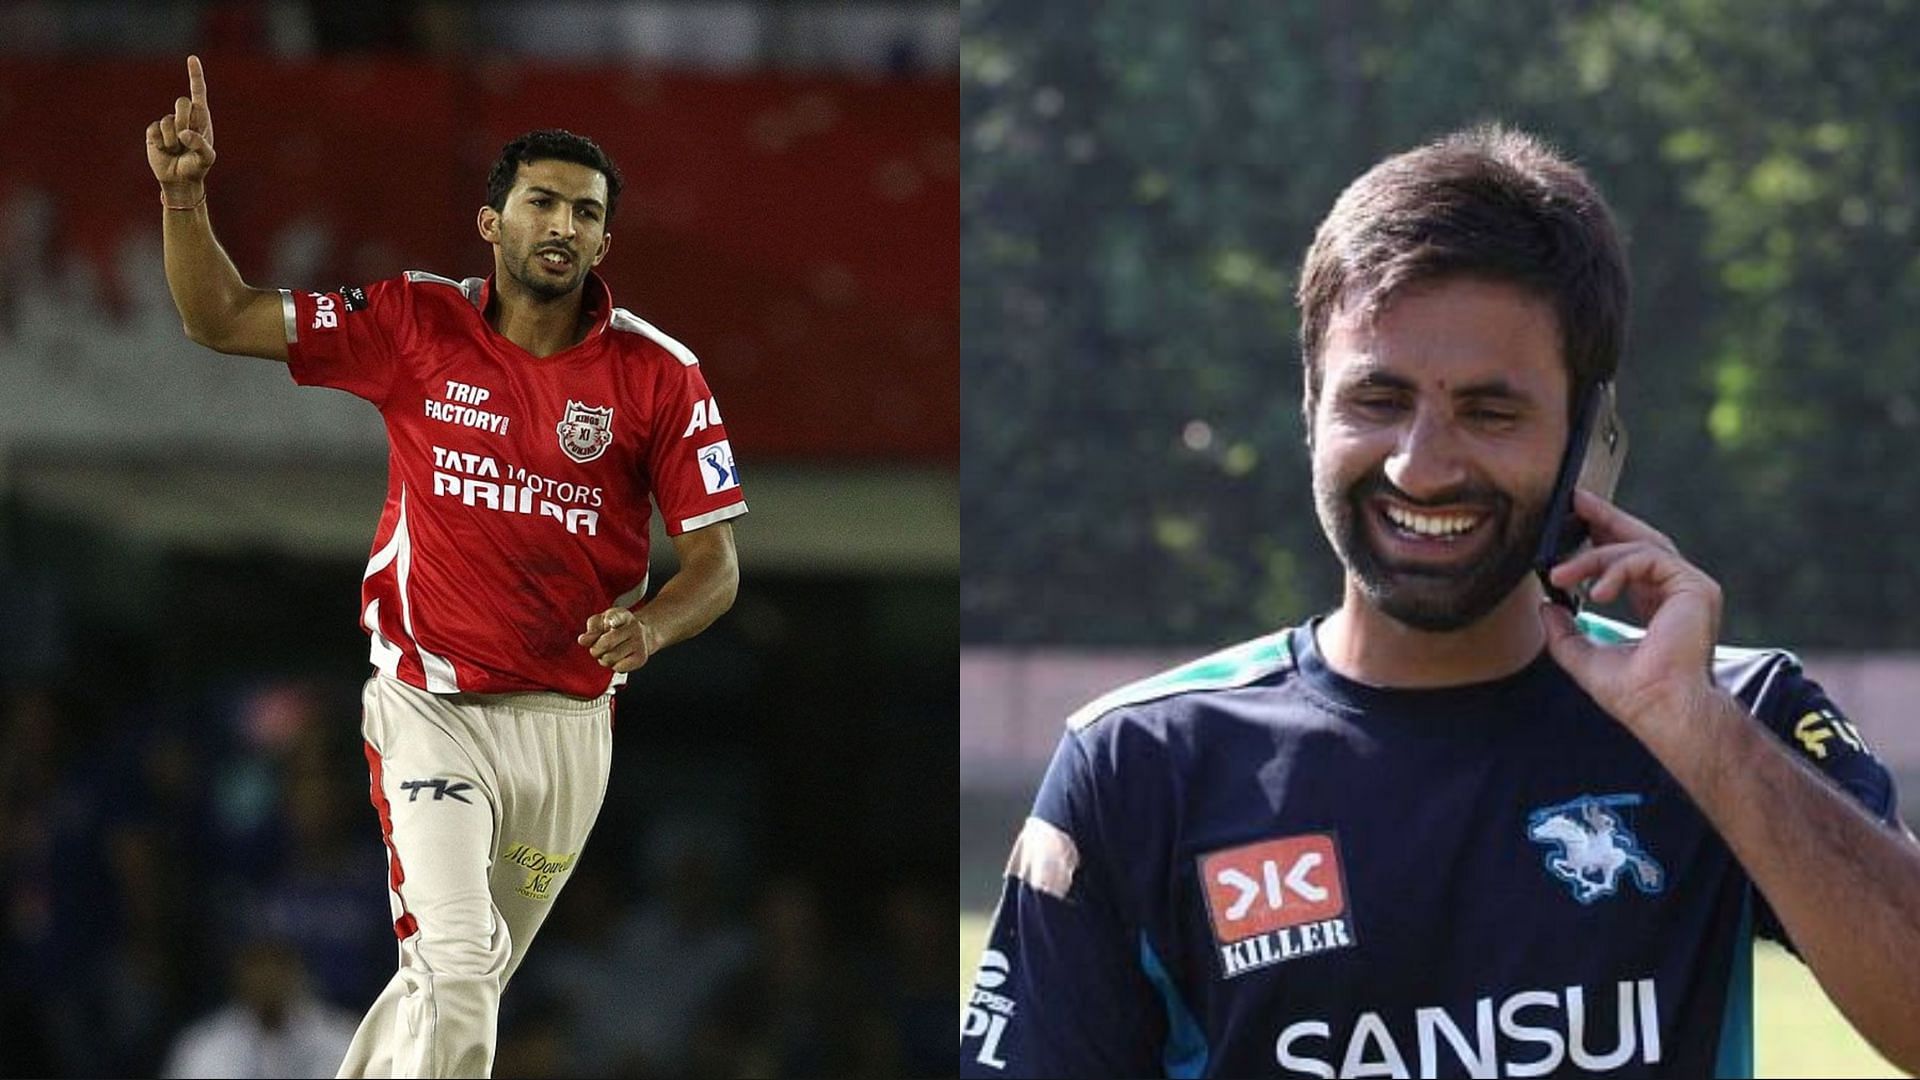 Rishi Dhawan (L) and Parvez Rasool were among the top performers in Syed Mushtaq Ali Trophy 2021/22